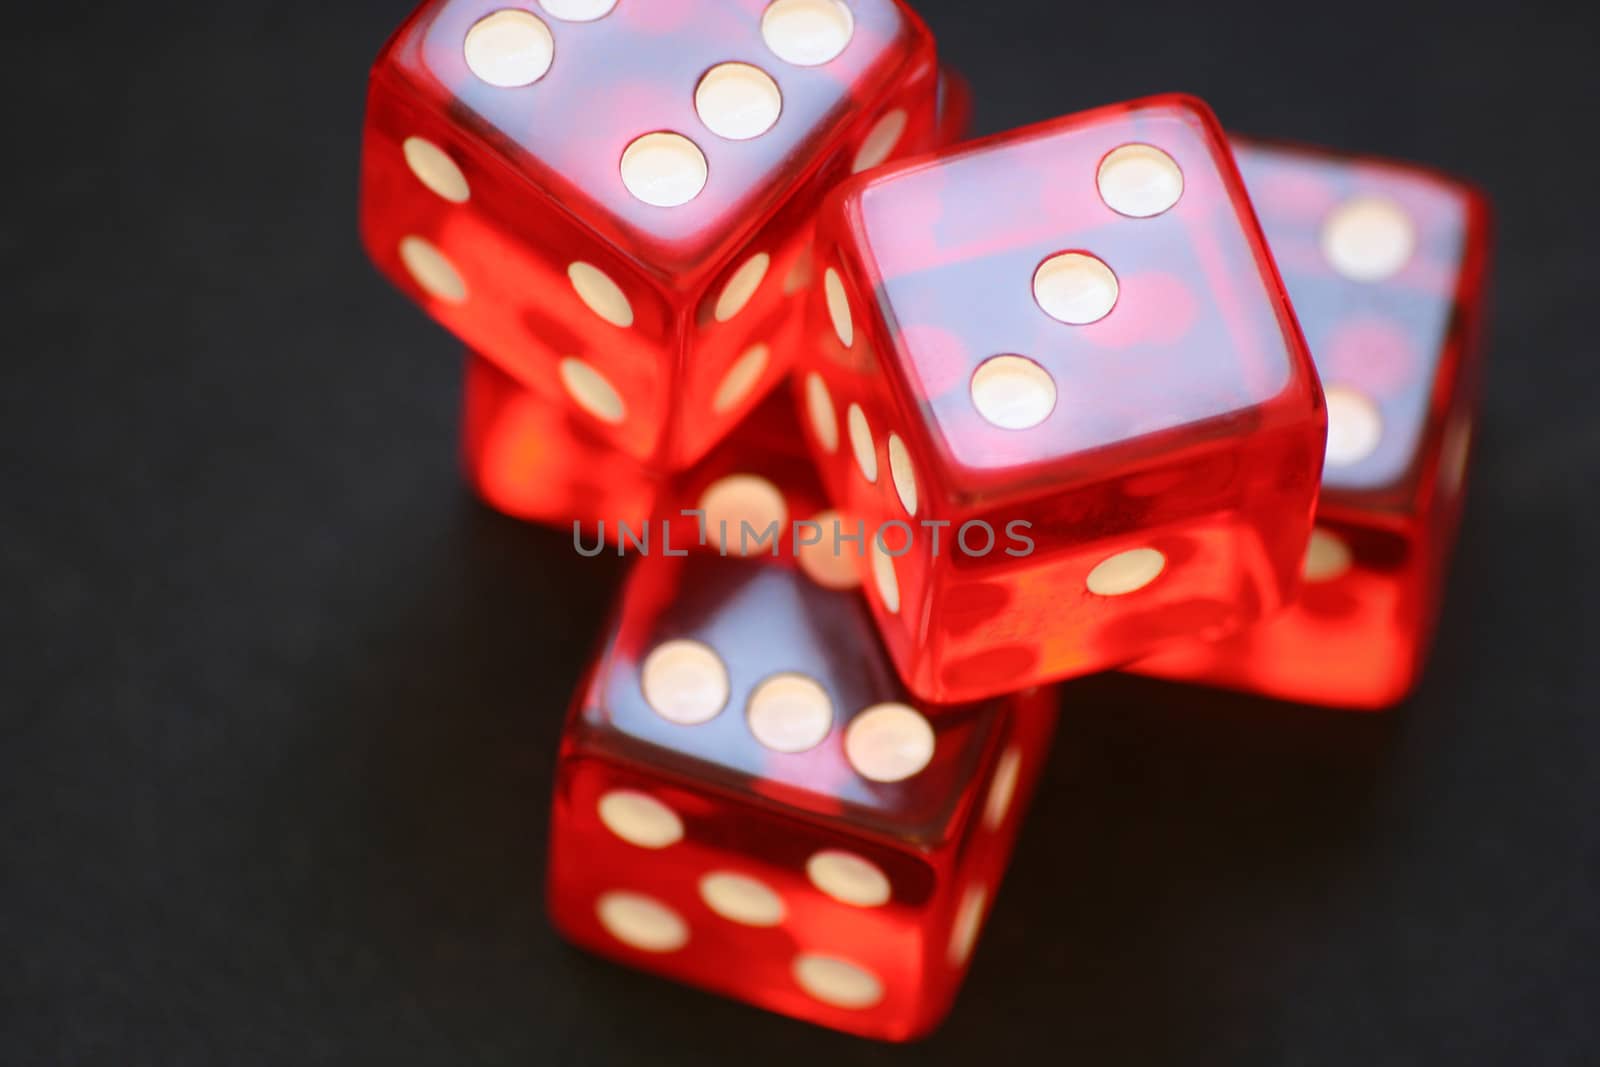 Red dice on black background